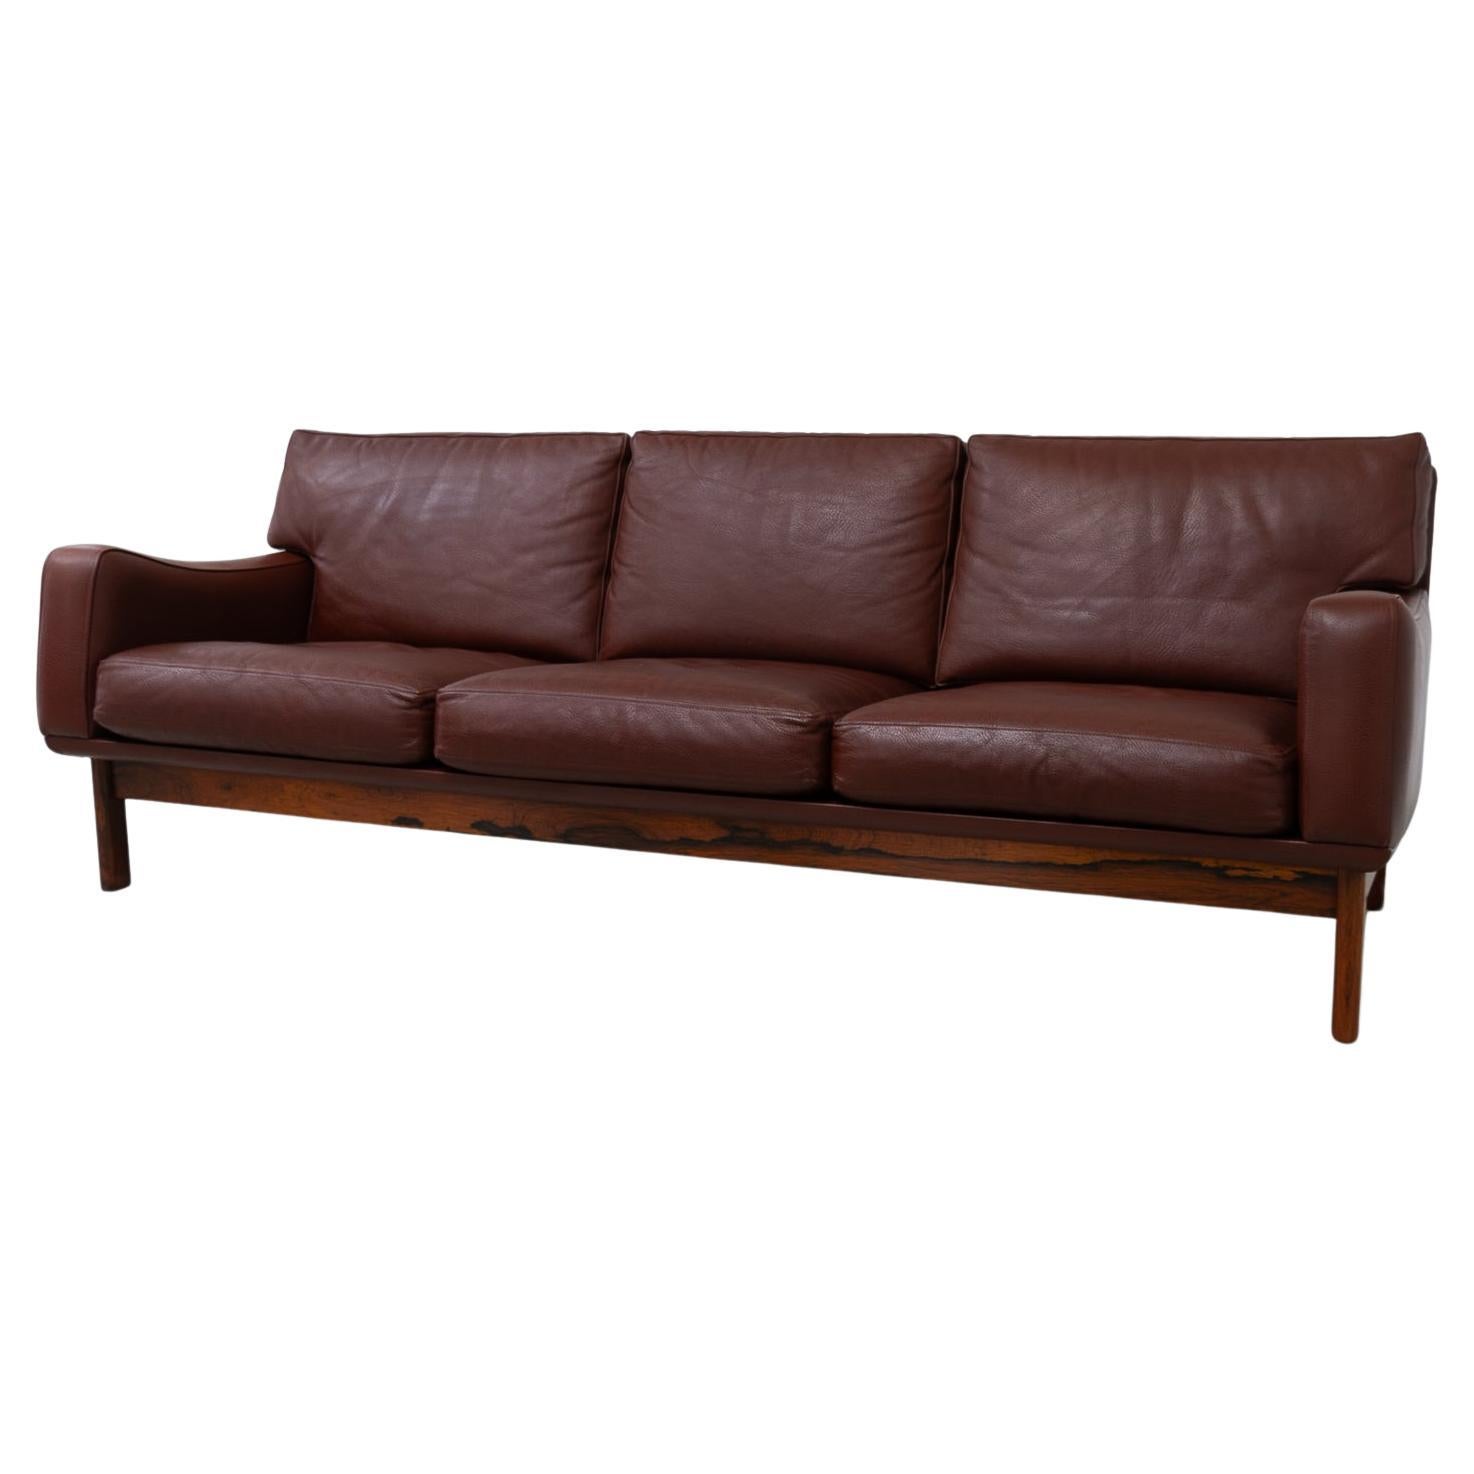 Danish Modern Leather and Rosewood Sofa by Eran, 1960s.